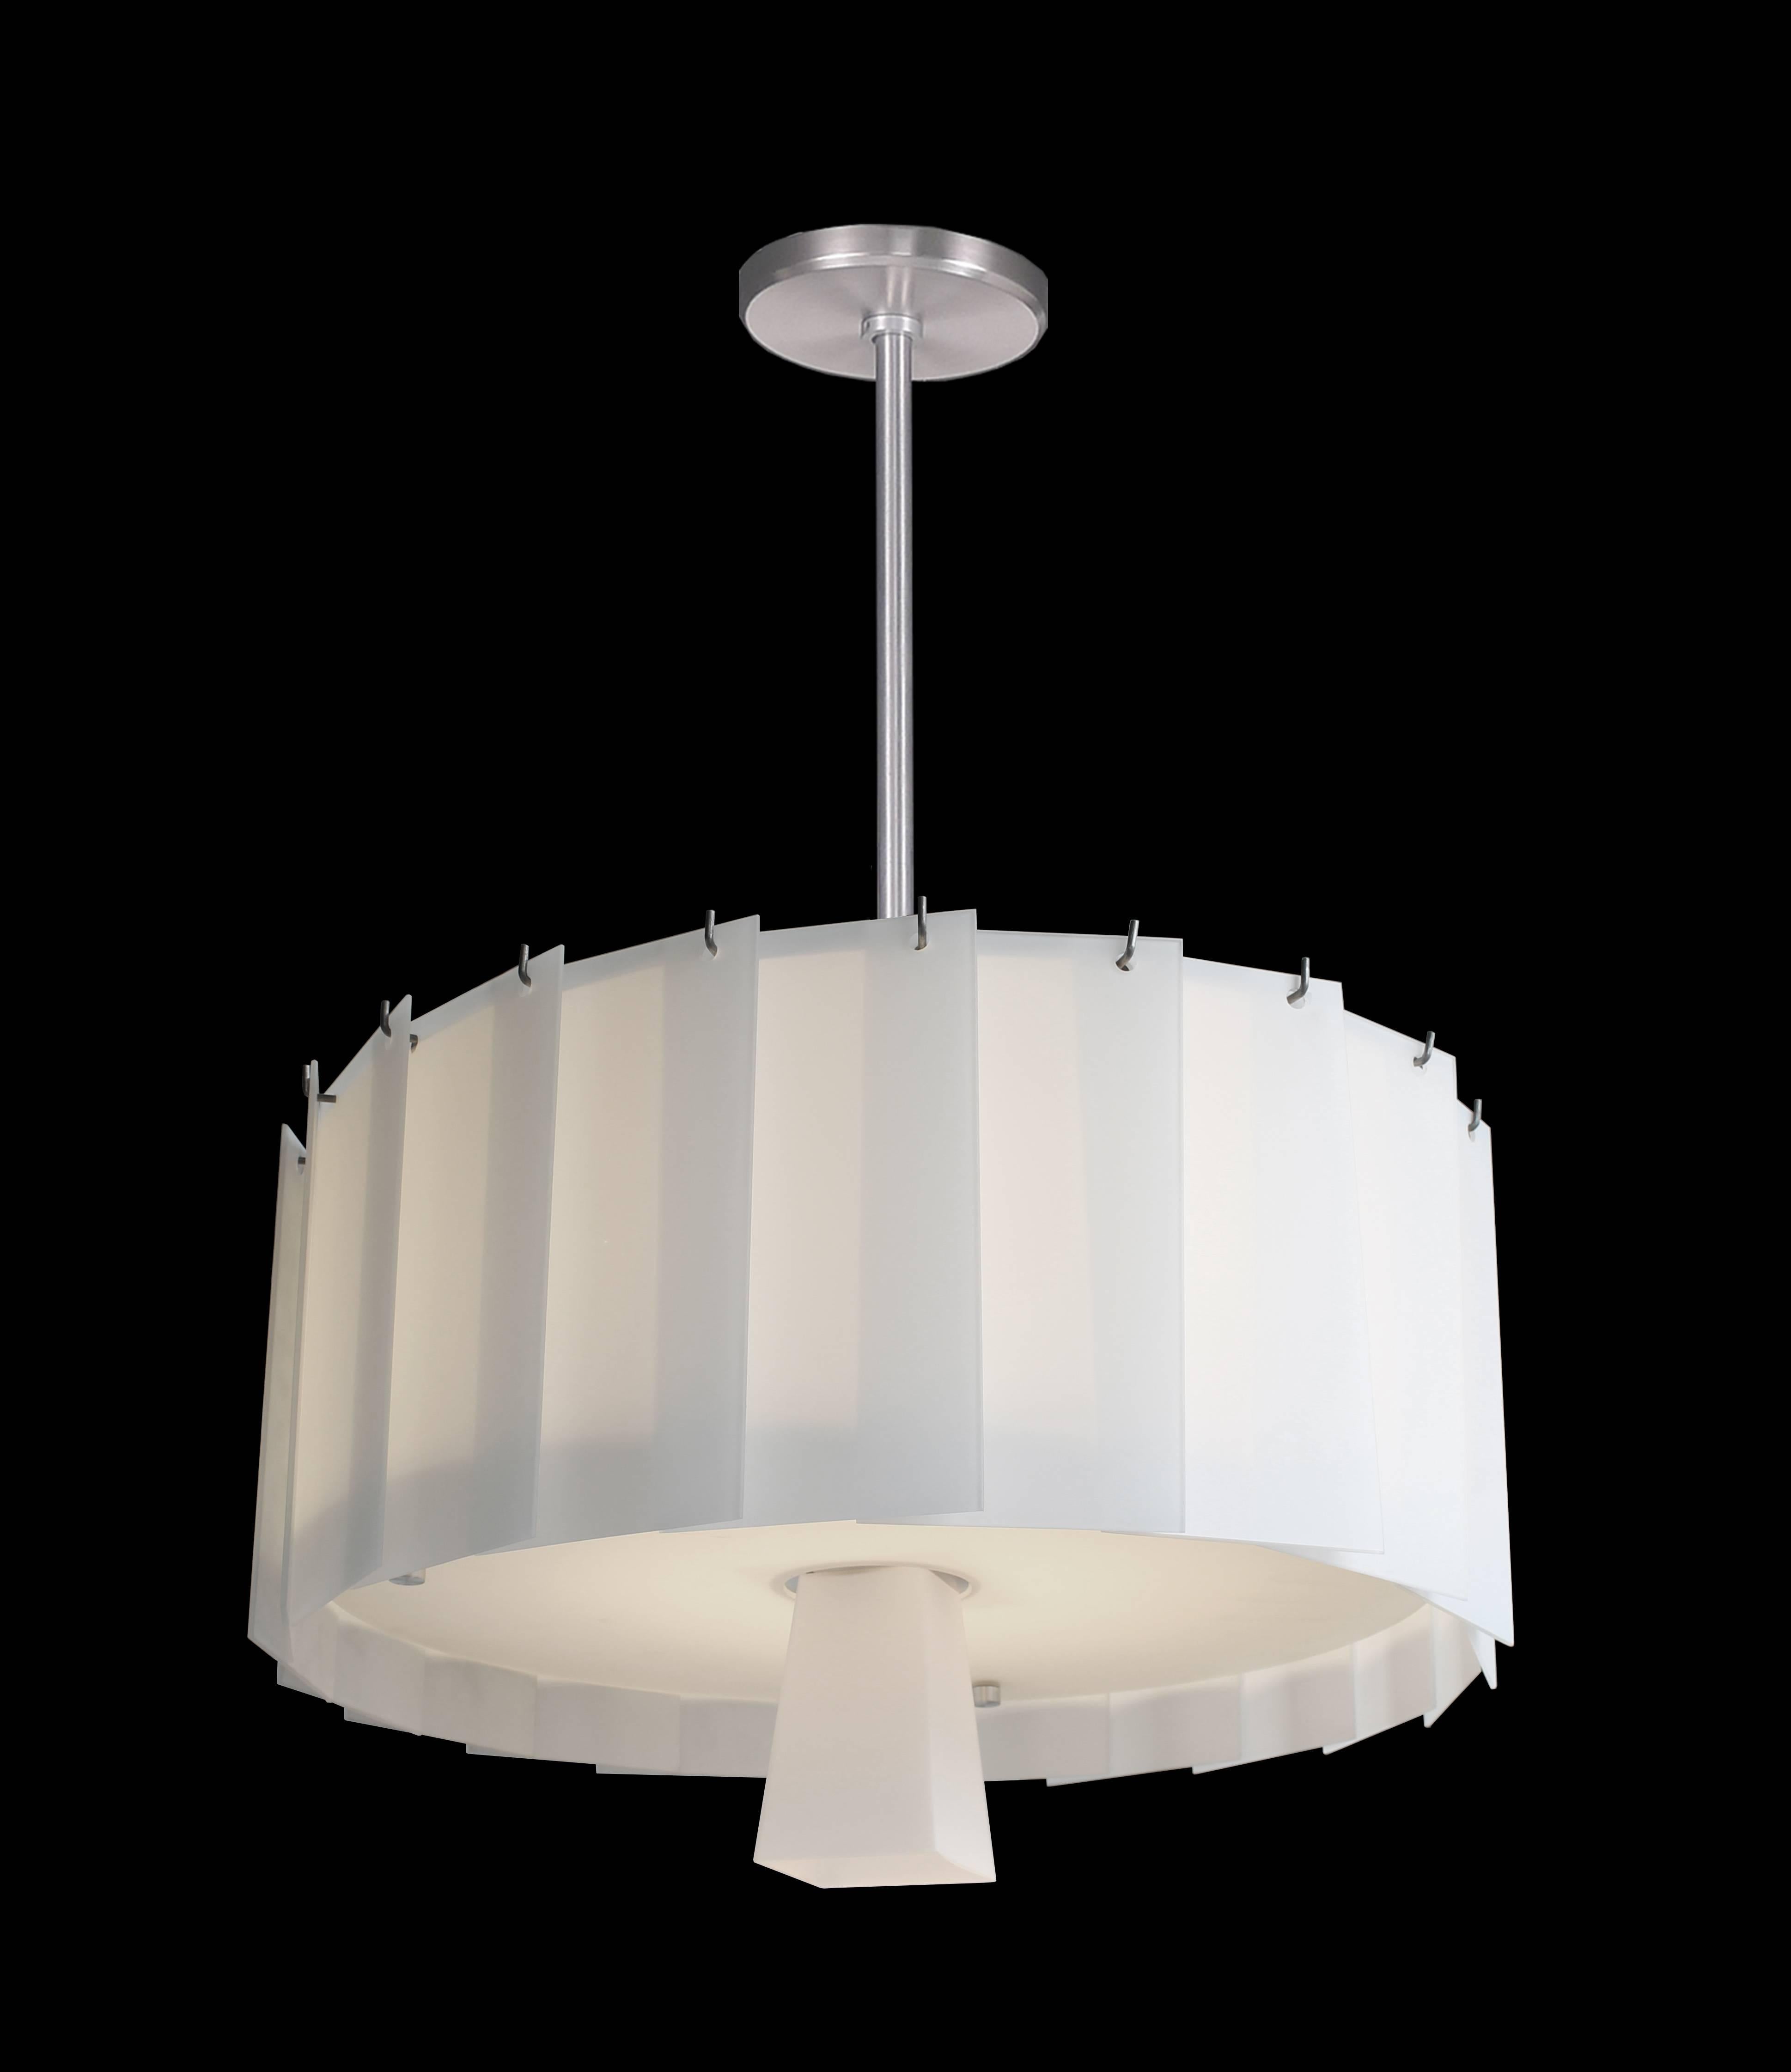 Circular flutter chandelier with overlapping white glass panels, Art Deco style with a touch of Mid-Century Modern Styling. Incandescent lamping, two circuits, downlight and ambient within the panels.

Architect, Sandy Littman of Duesenberg LTD. 